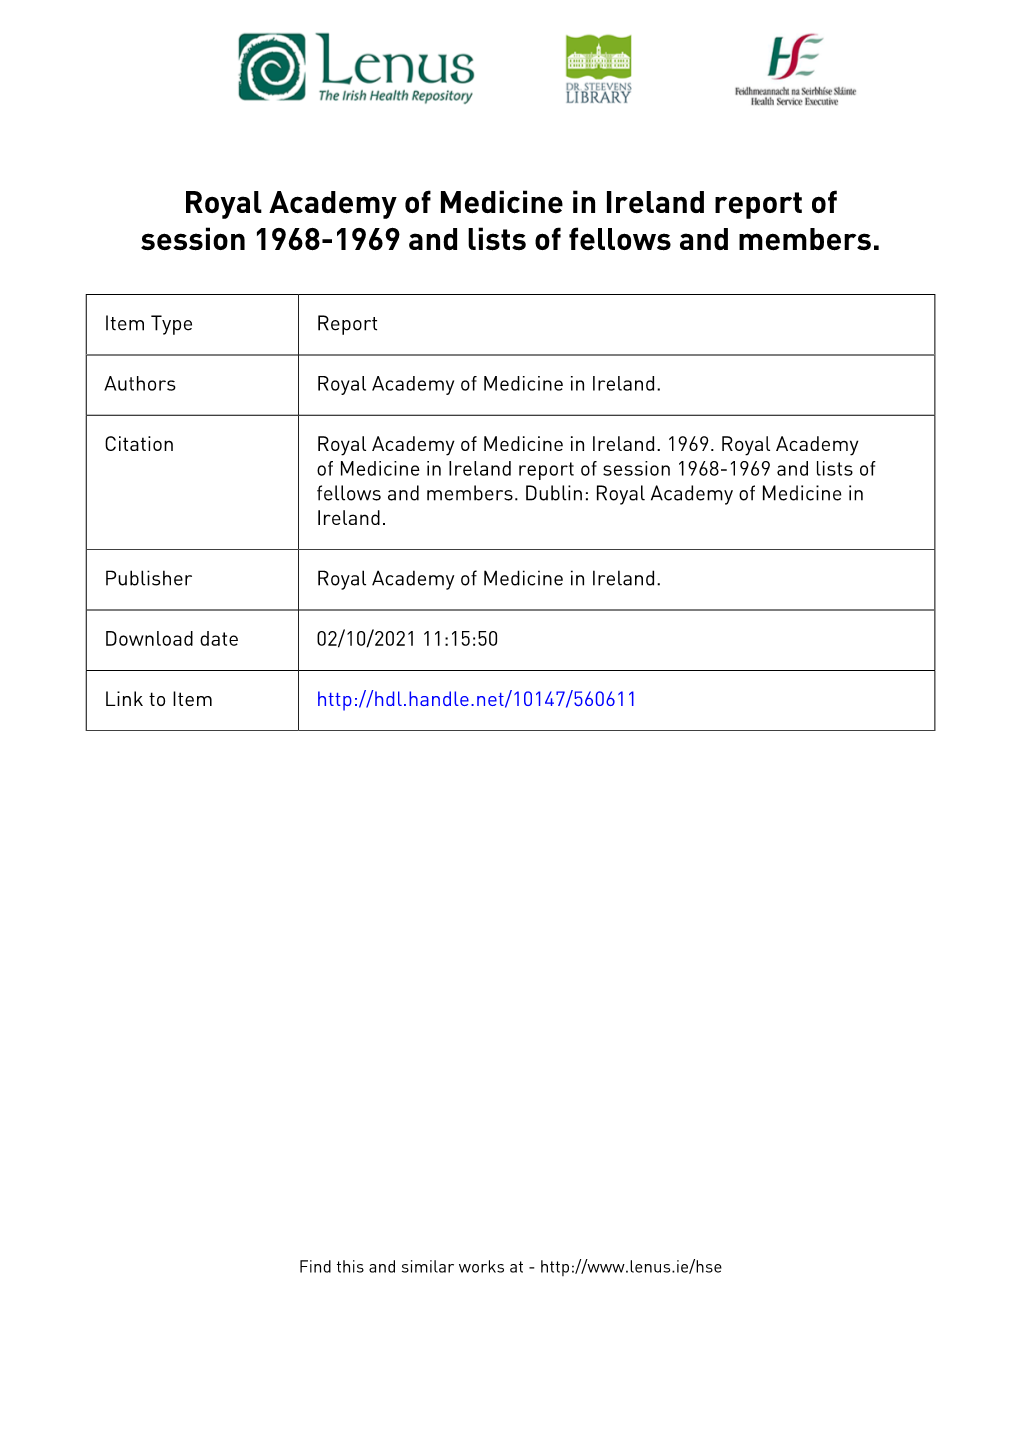 Report of Session 1968-1969 and Lists of Fellows and Members